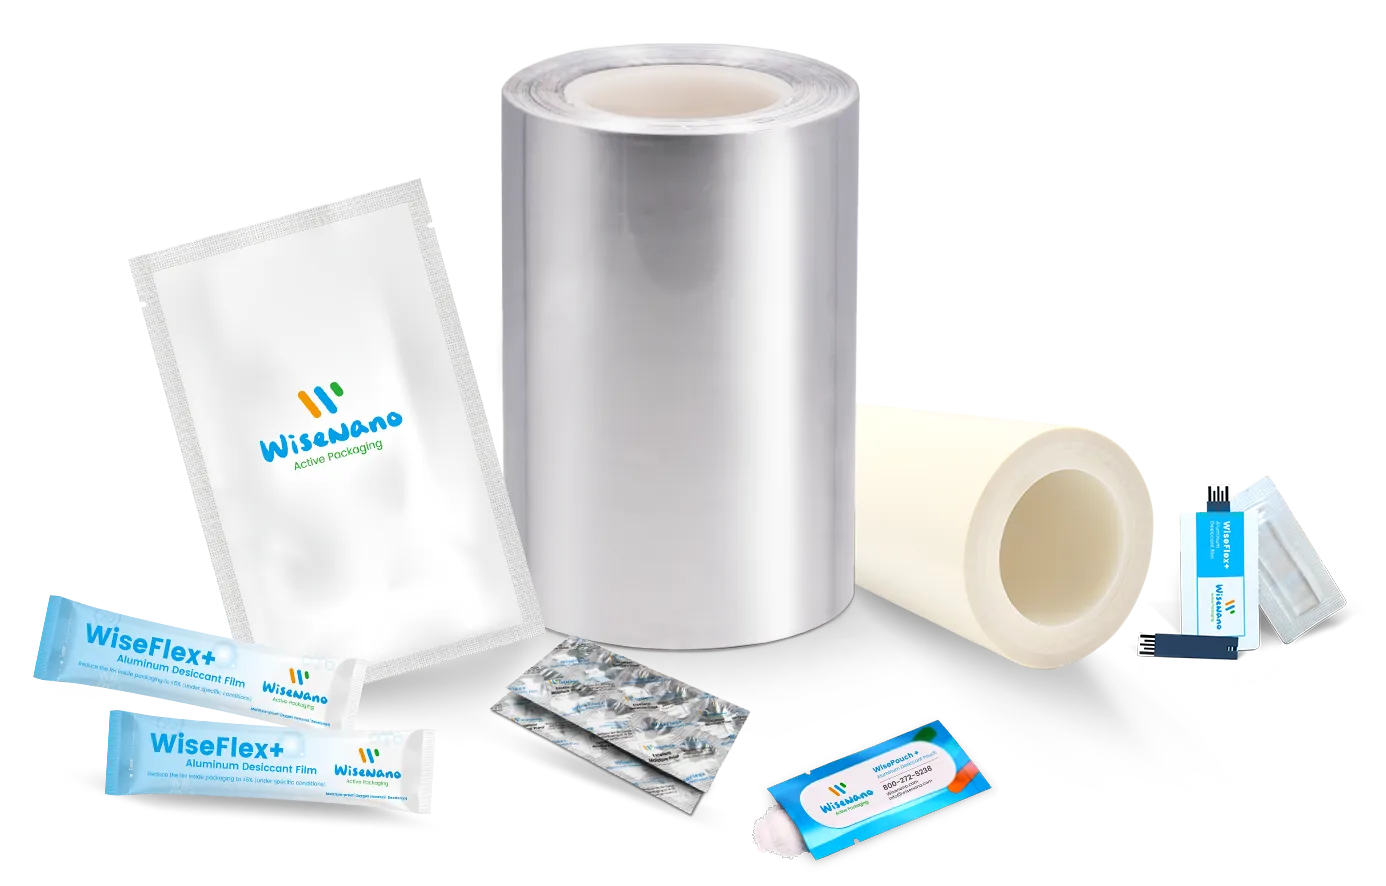 Products that use Wisenano's Flexible Desiccant